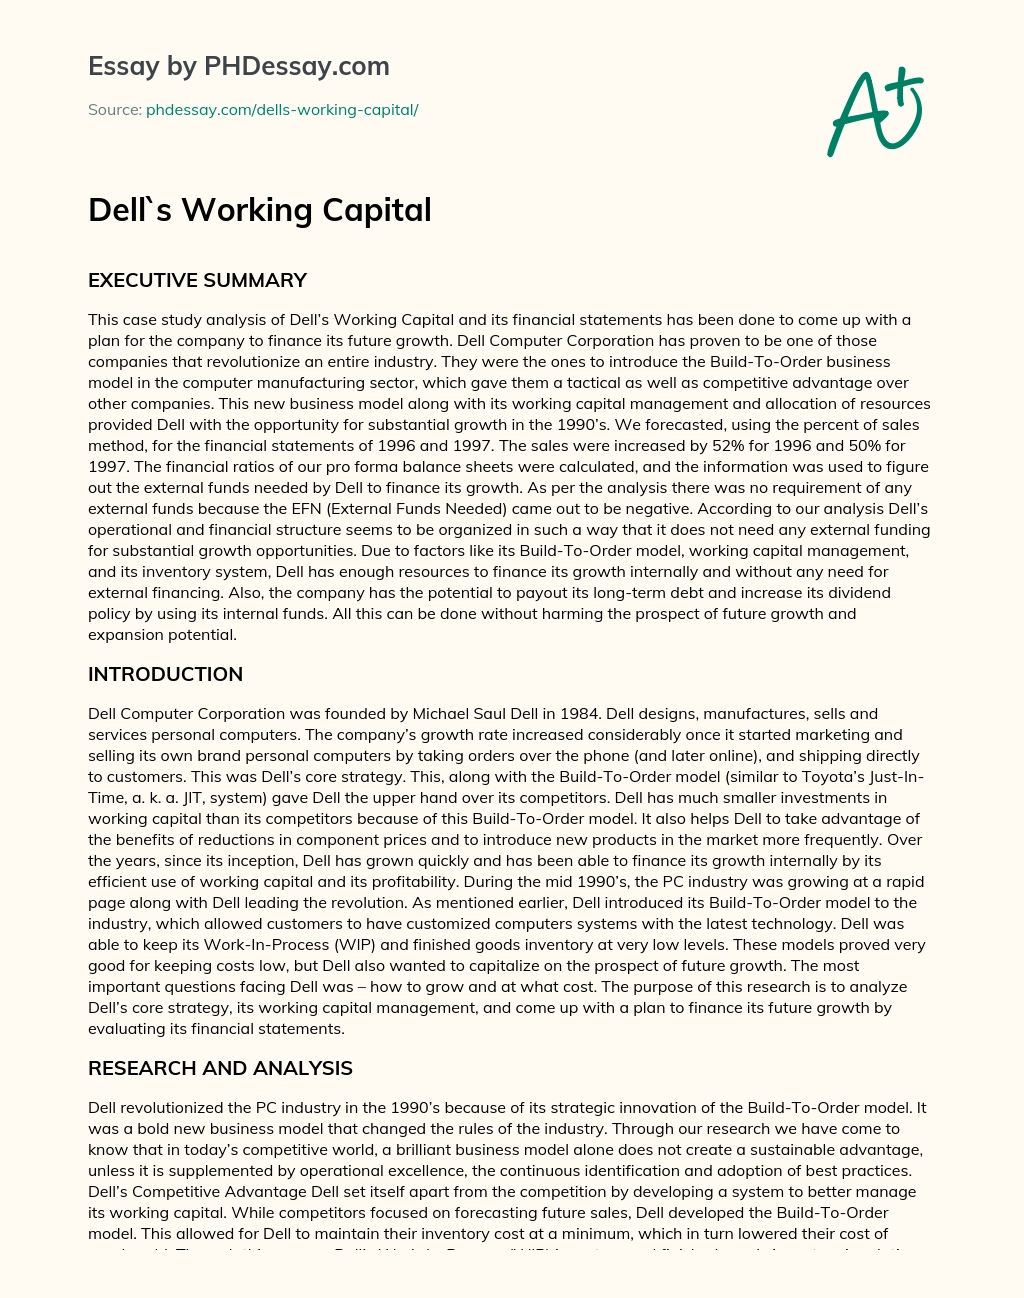 Dell`s Working Capital essay